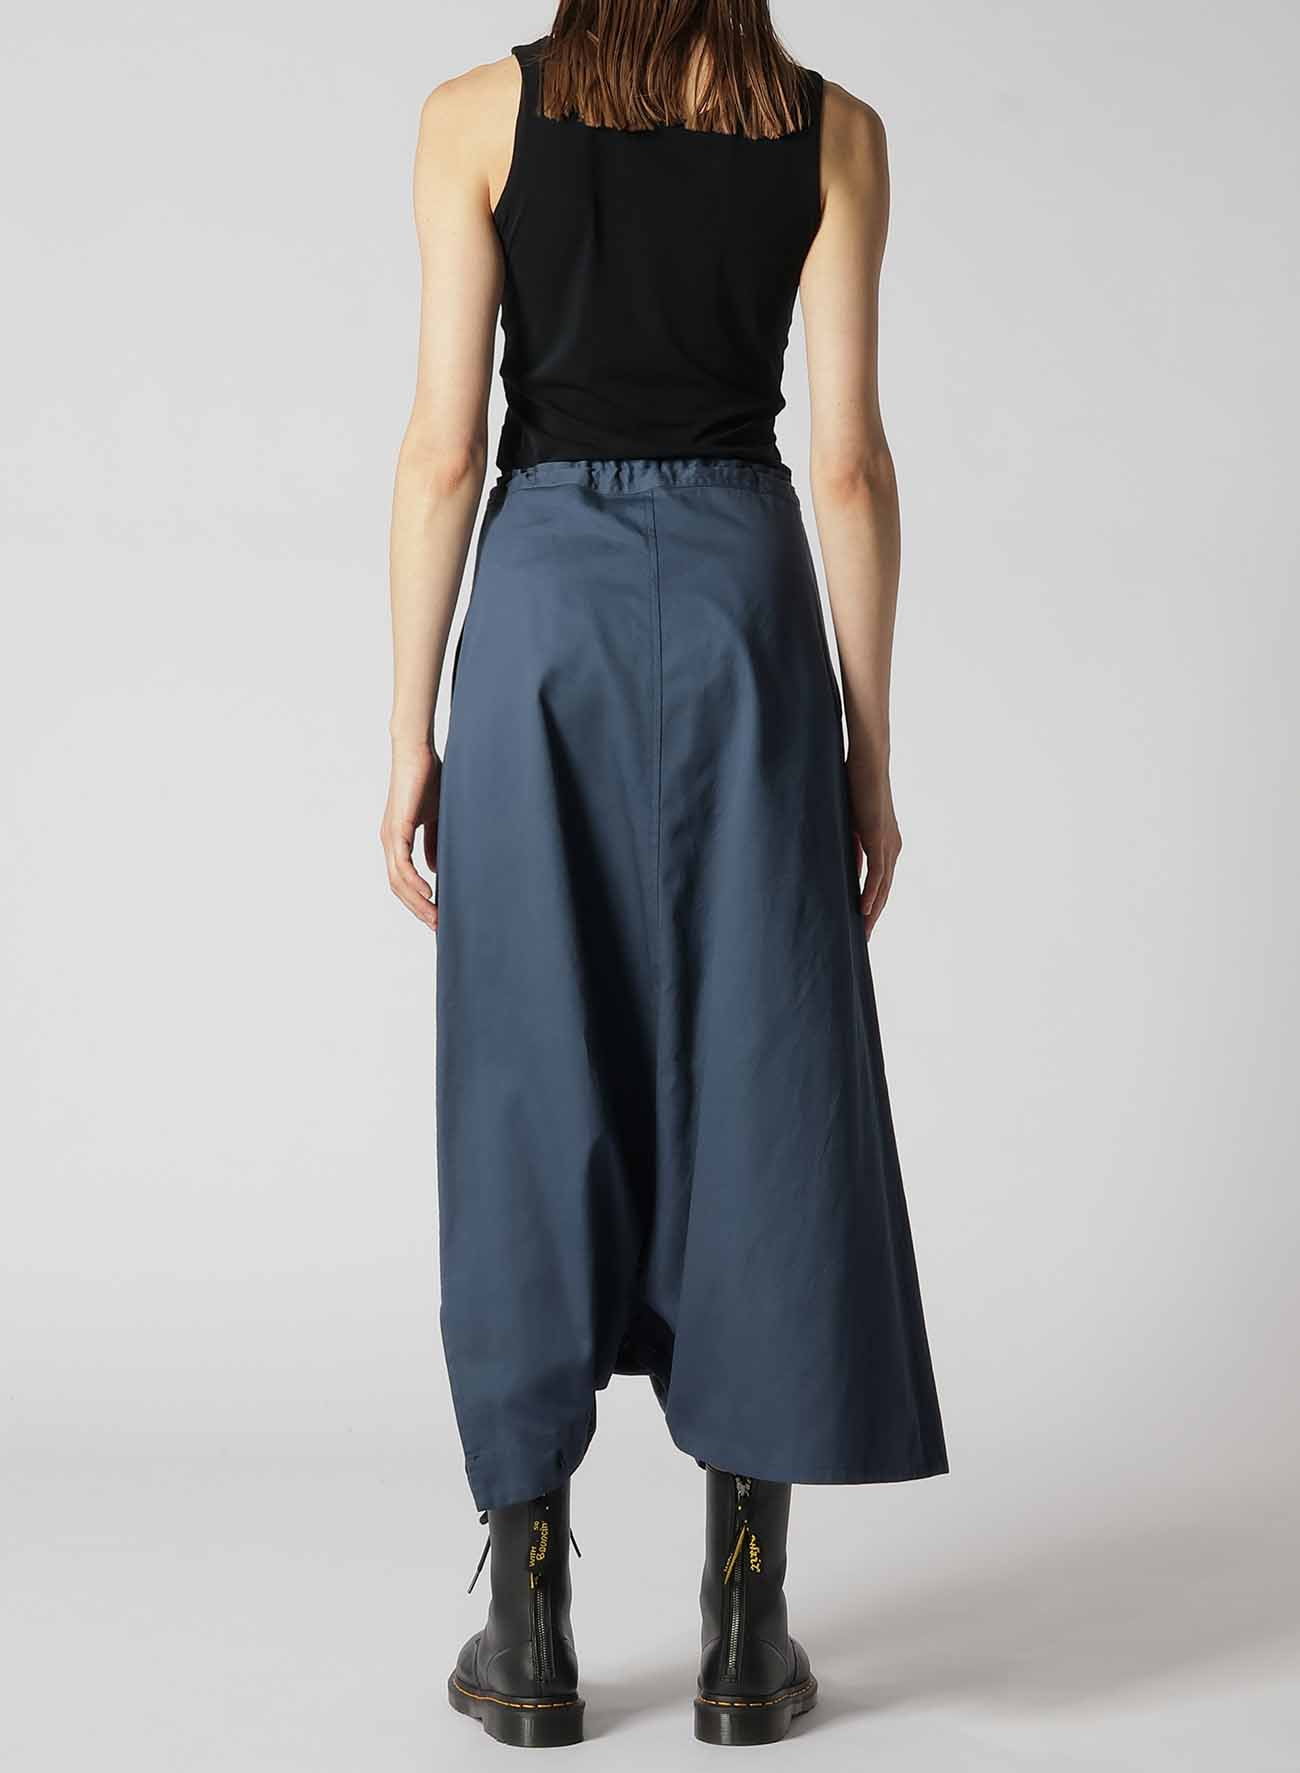 [Y's BORN PRODUCT] COTTON TWILL SKIRT PANTS